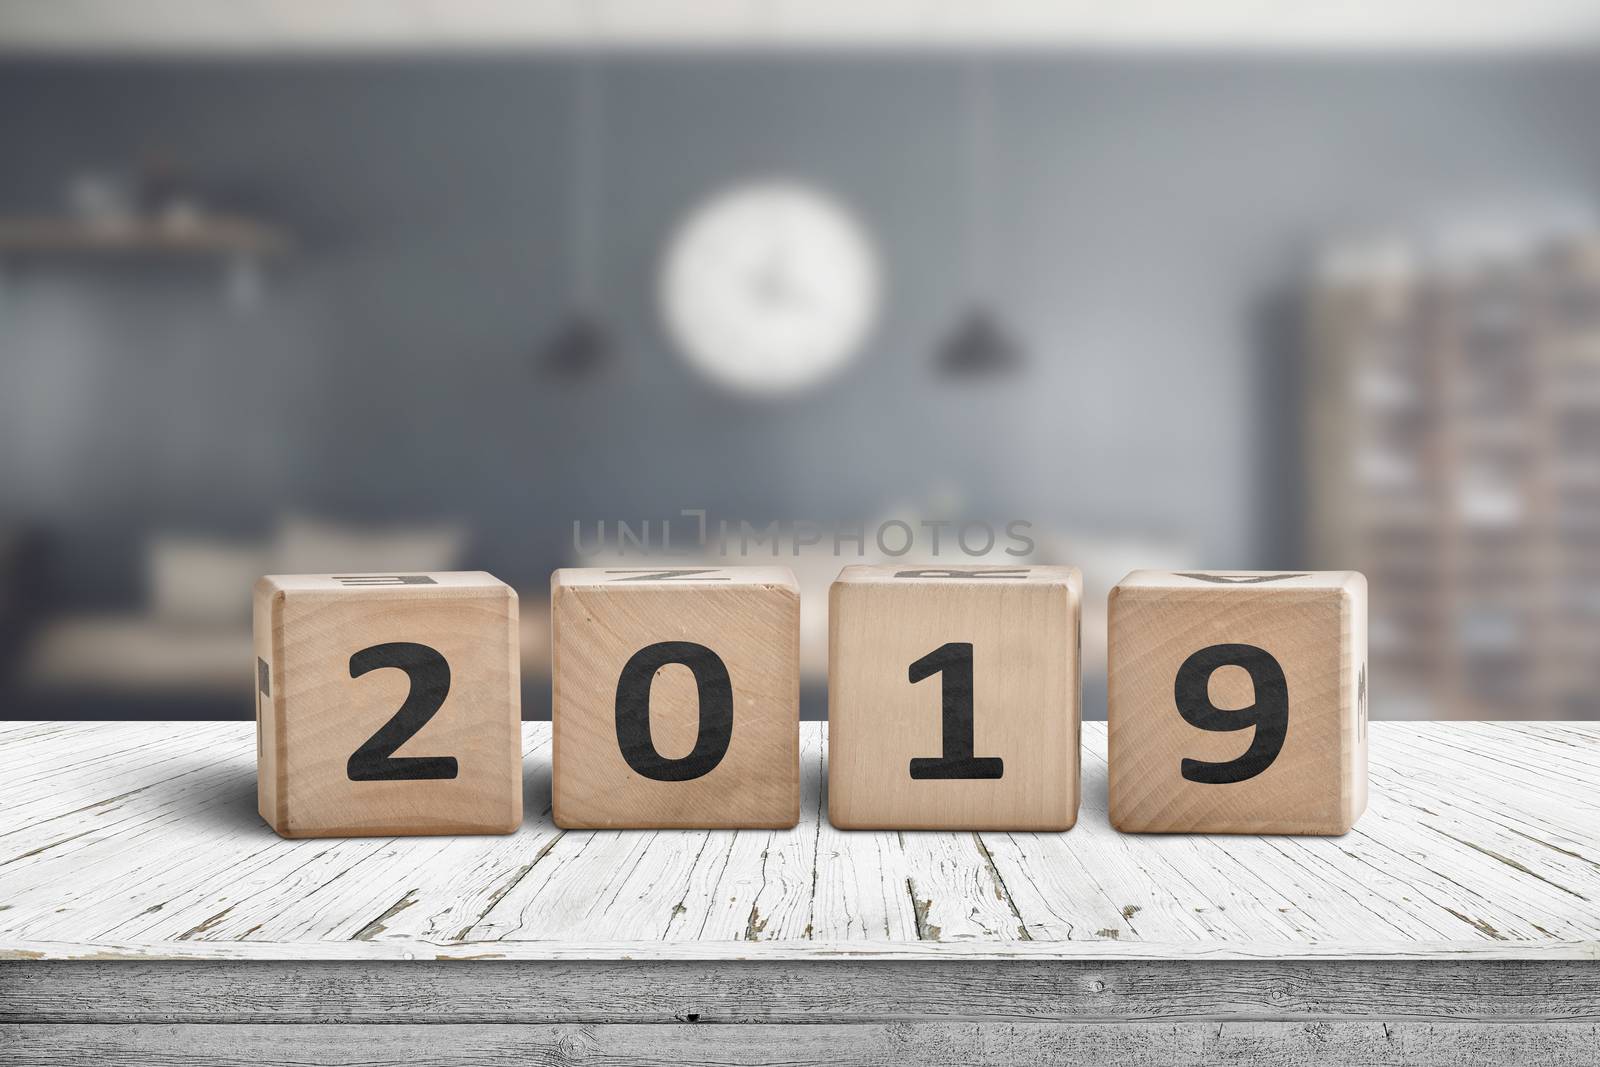 2019 year sign on a wooden table in a living room on a blurry background